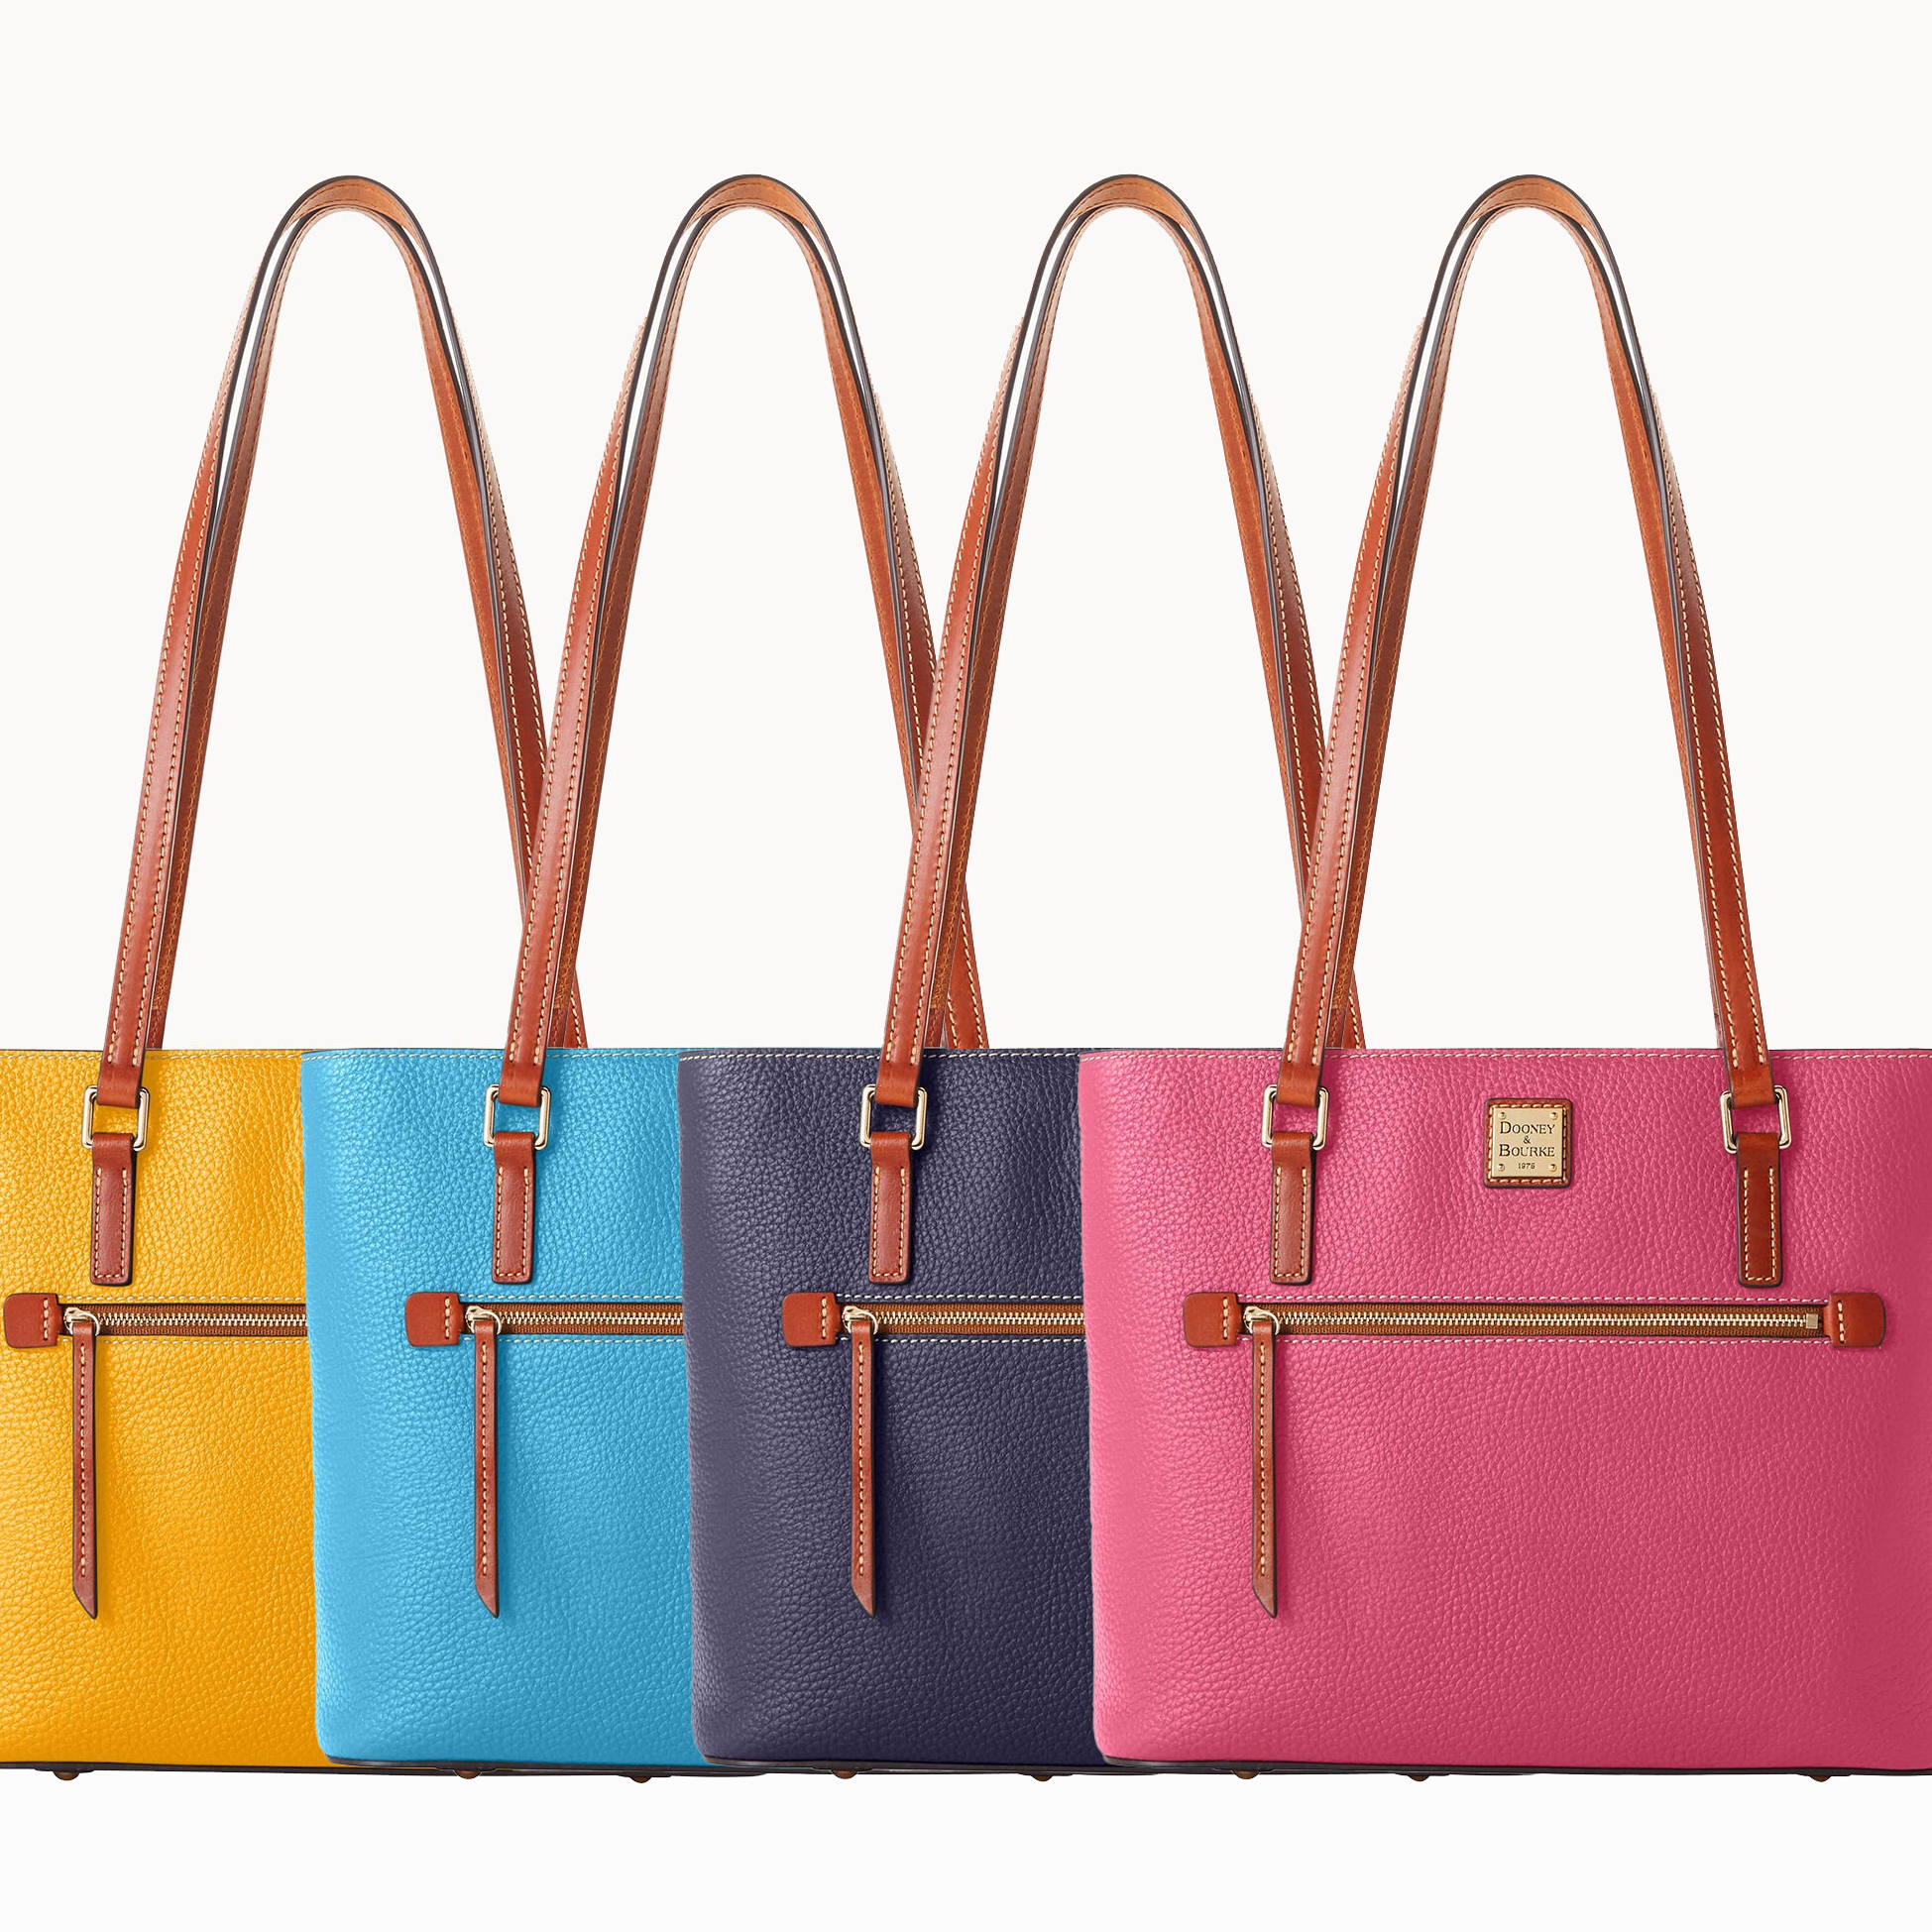 Four colorful tote bags with leather straps and front zipper details, in yellow, aqua blue, navy blue, and pink.